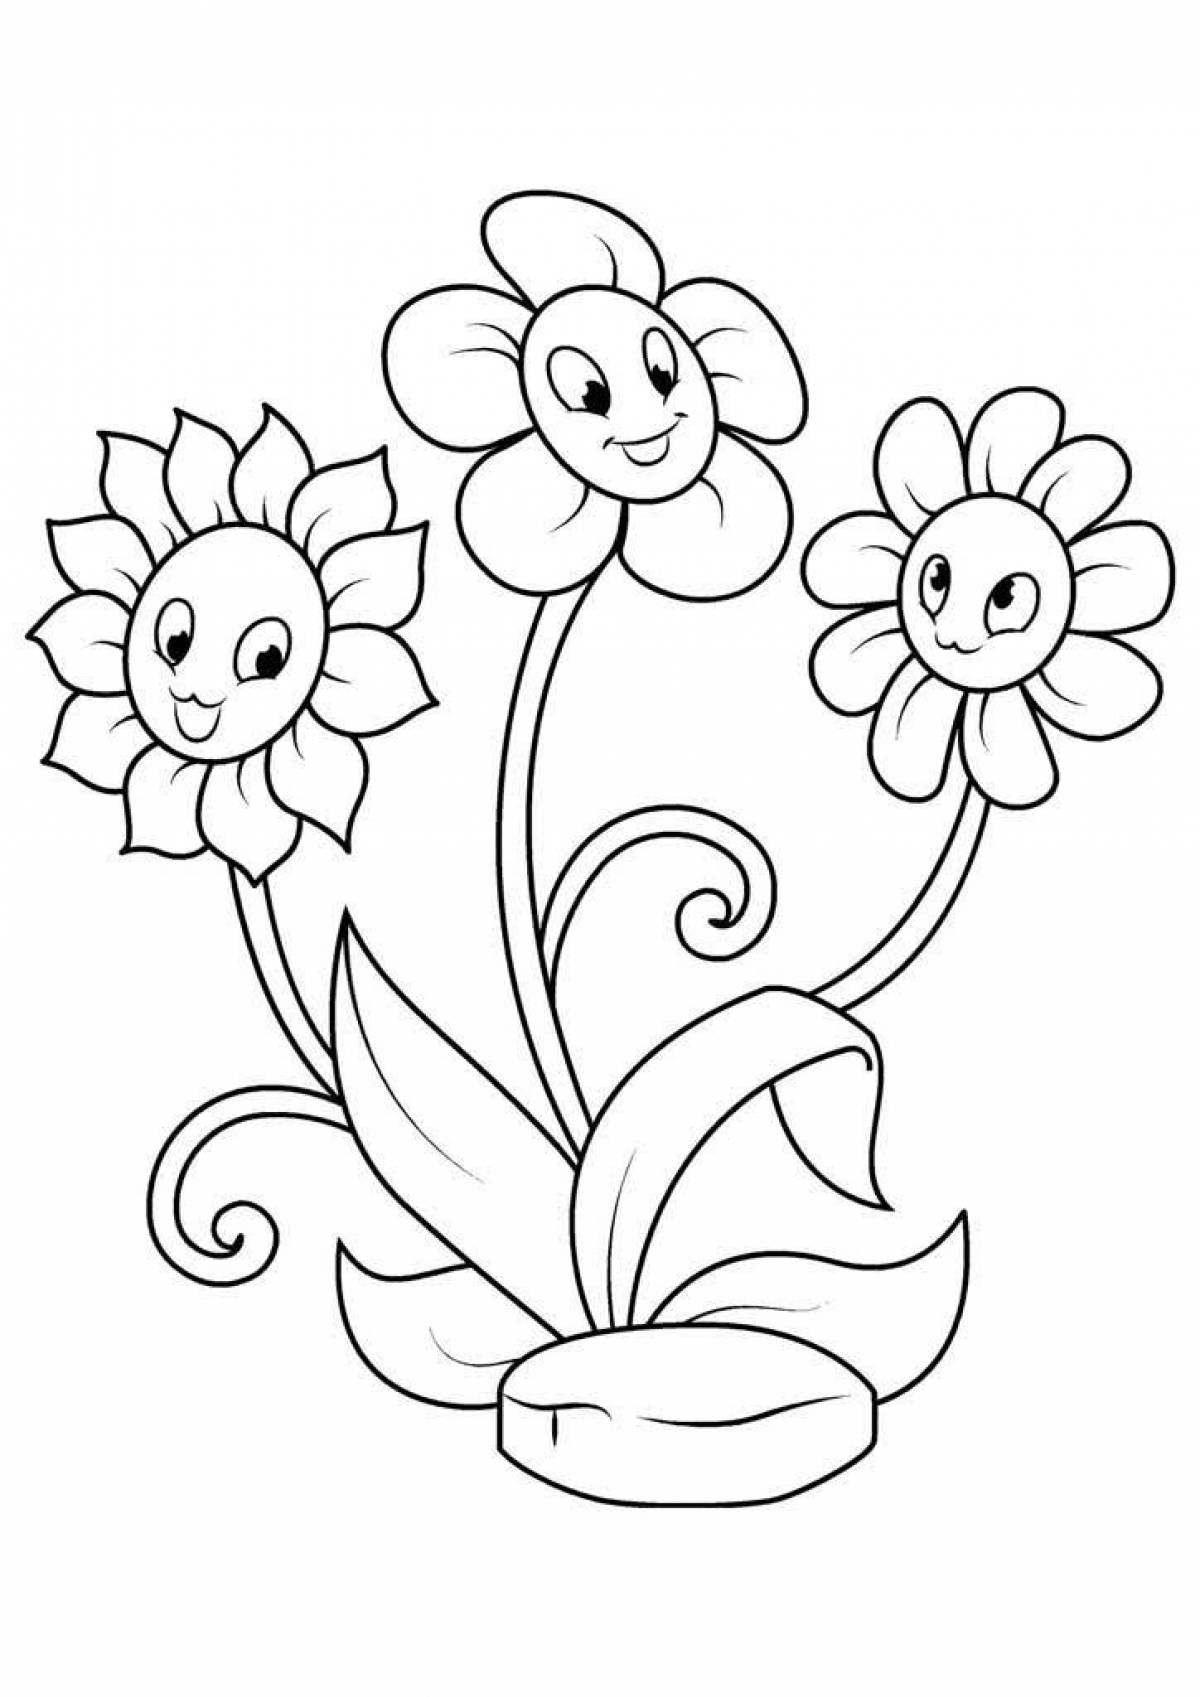 Cute flower coloring pages for 4-5 year olds